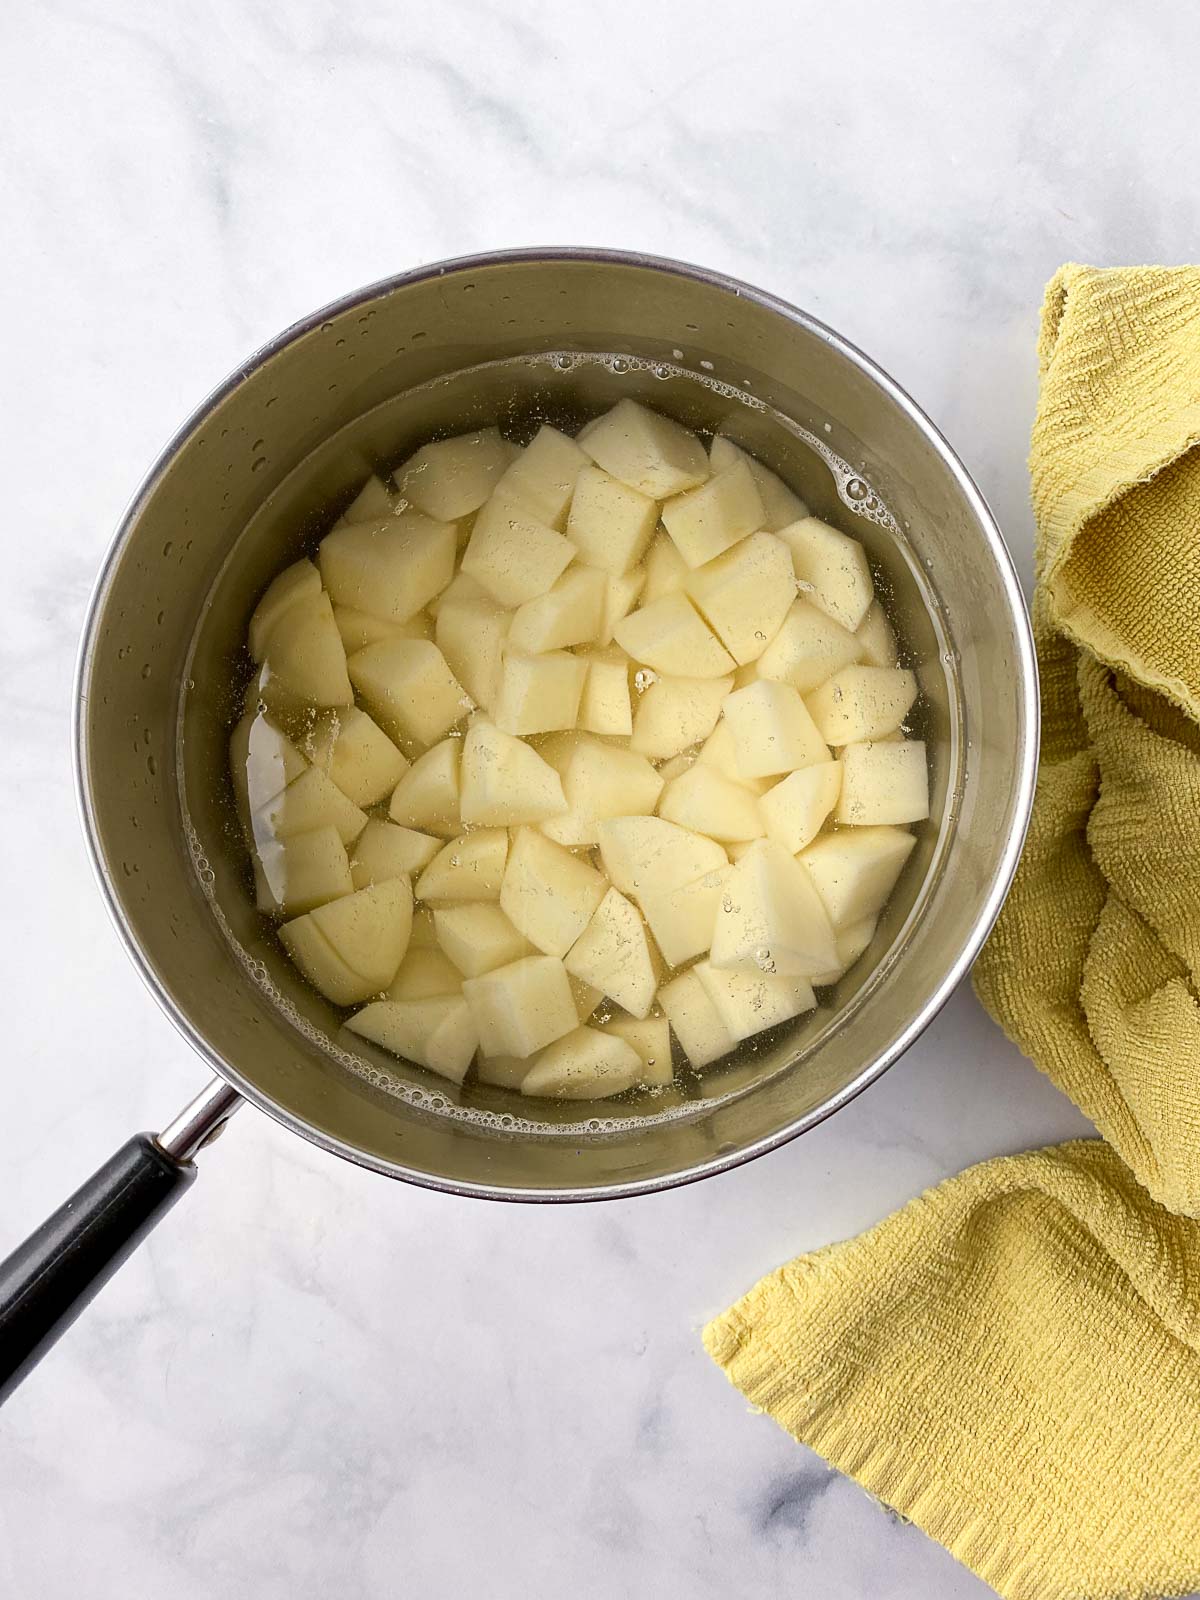 Diced potatoes in a pot of water.